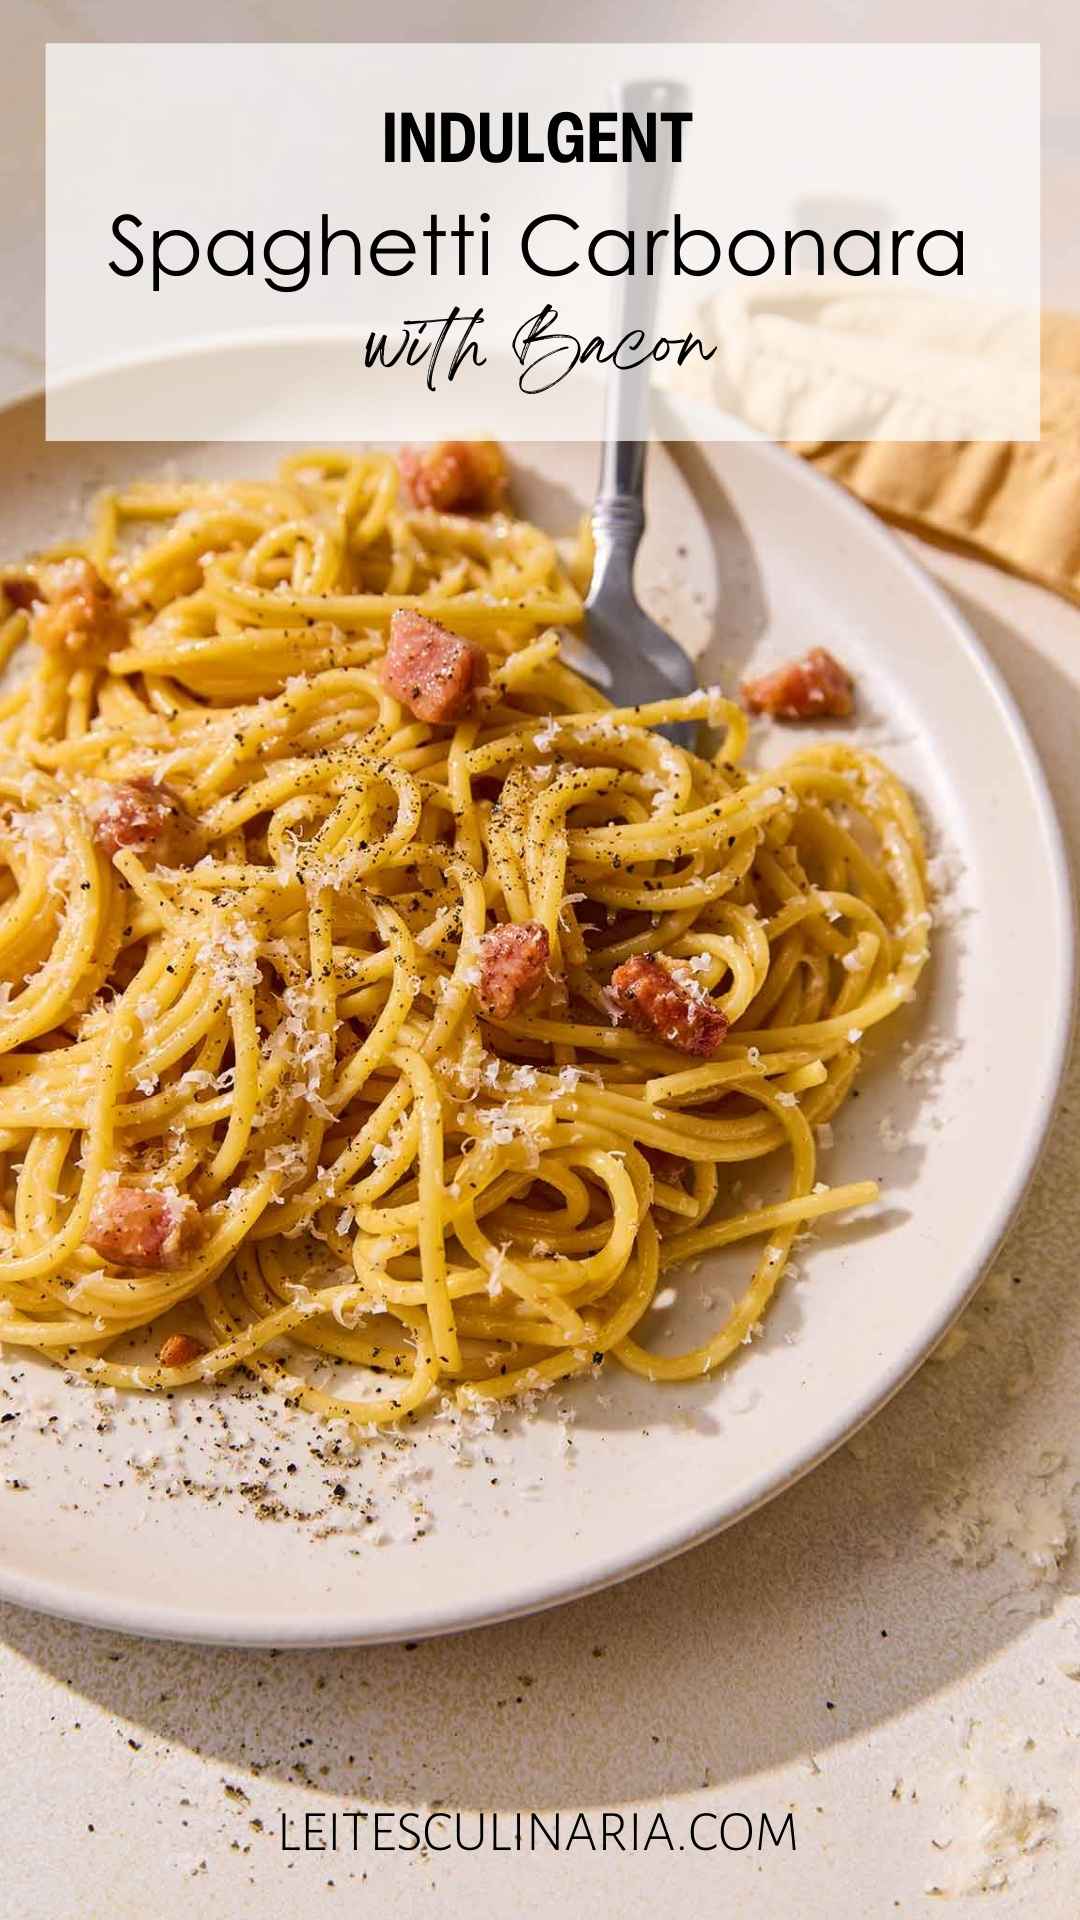 A plate of spaghetti carbonara with cubes of pancetta, Parmesan, and black pepper.